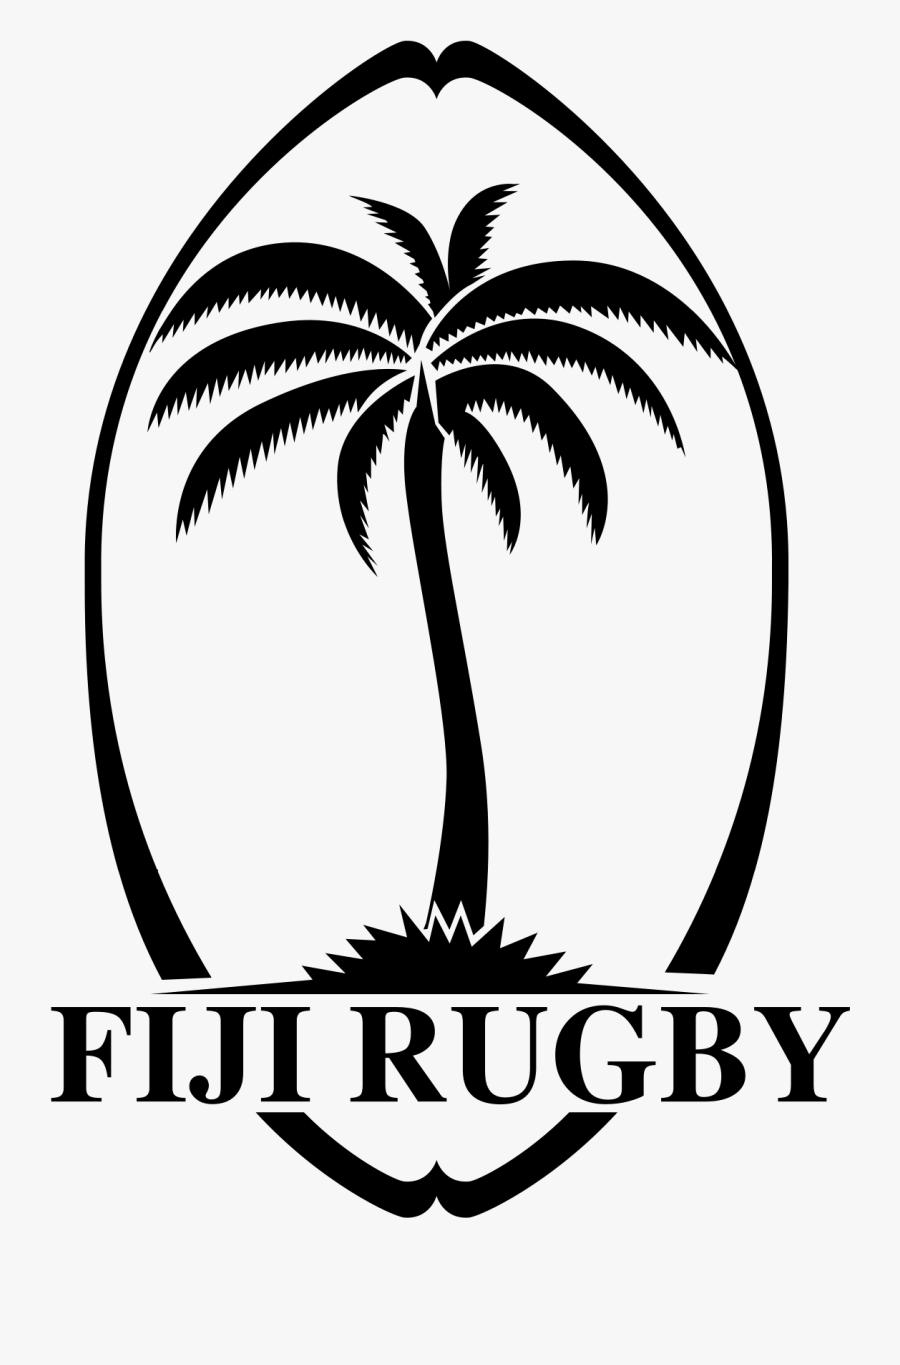 Fiji Rugby Logo - Fiji National Rugby Union Team, Transparent Clipart